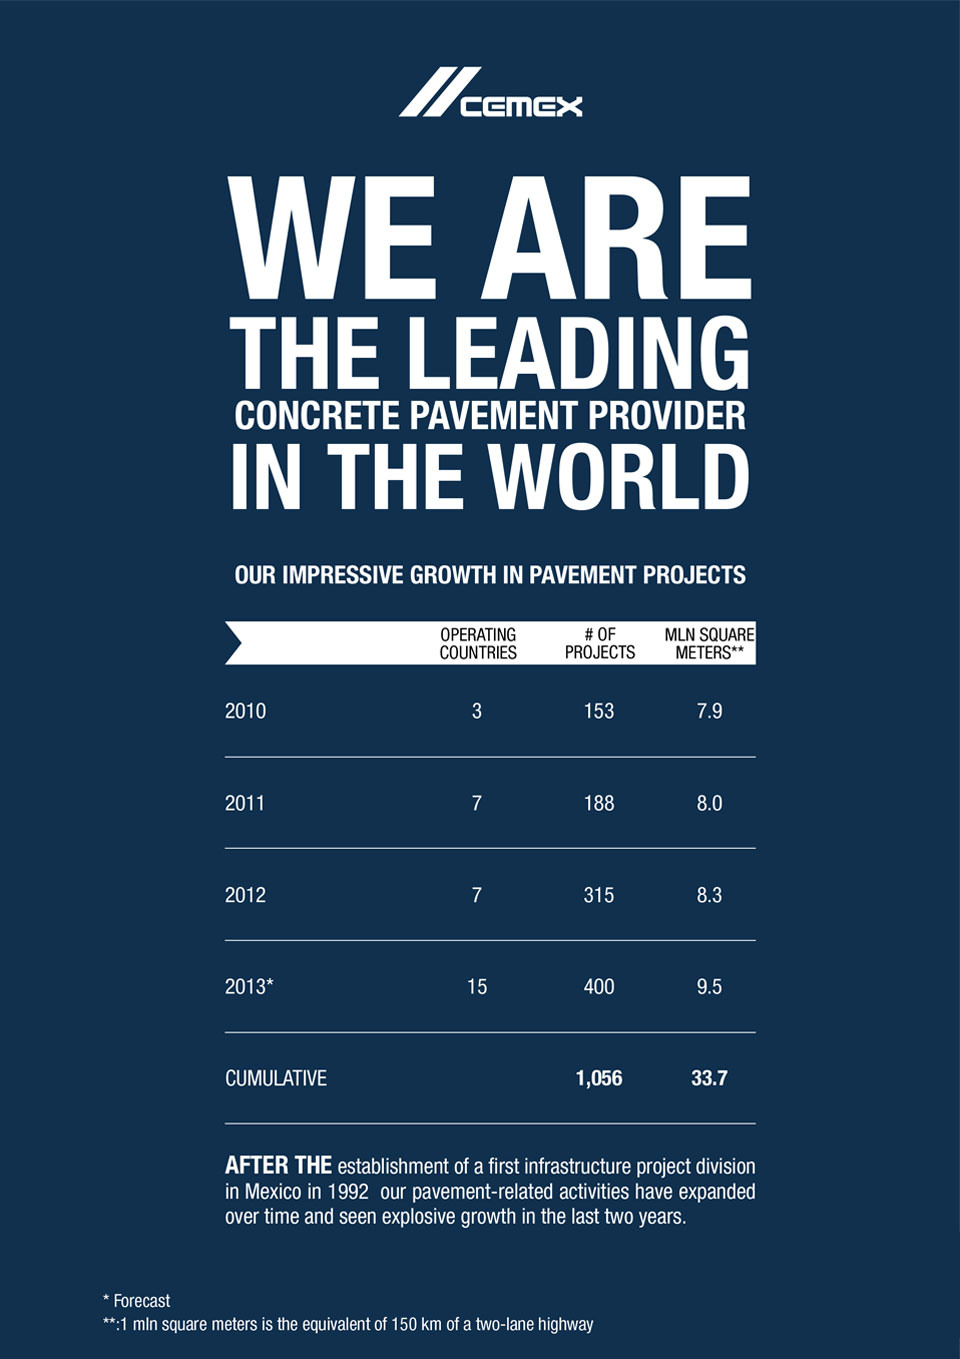 the image shows CEMEX's statistics about their growth in pavement projects in recent years